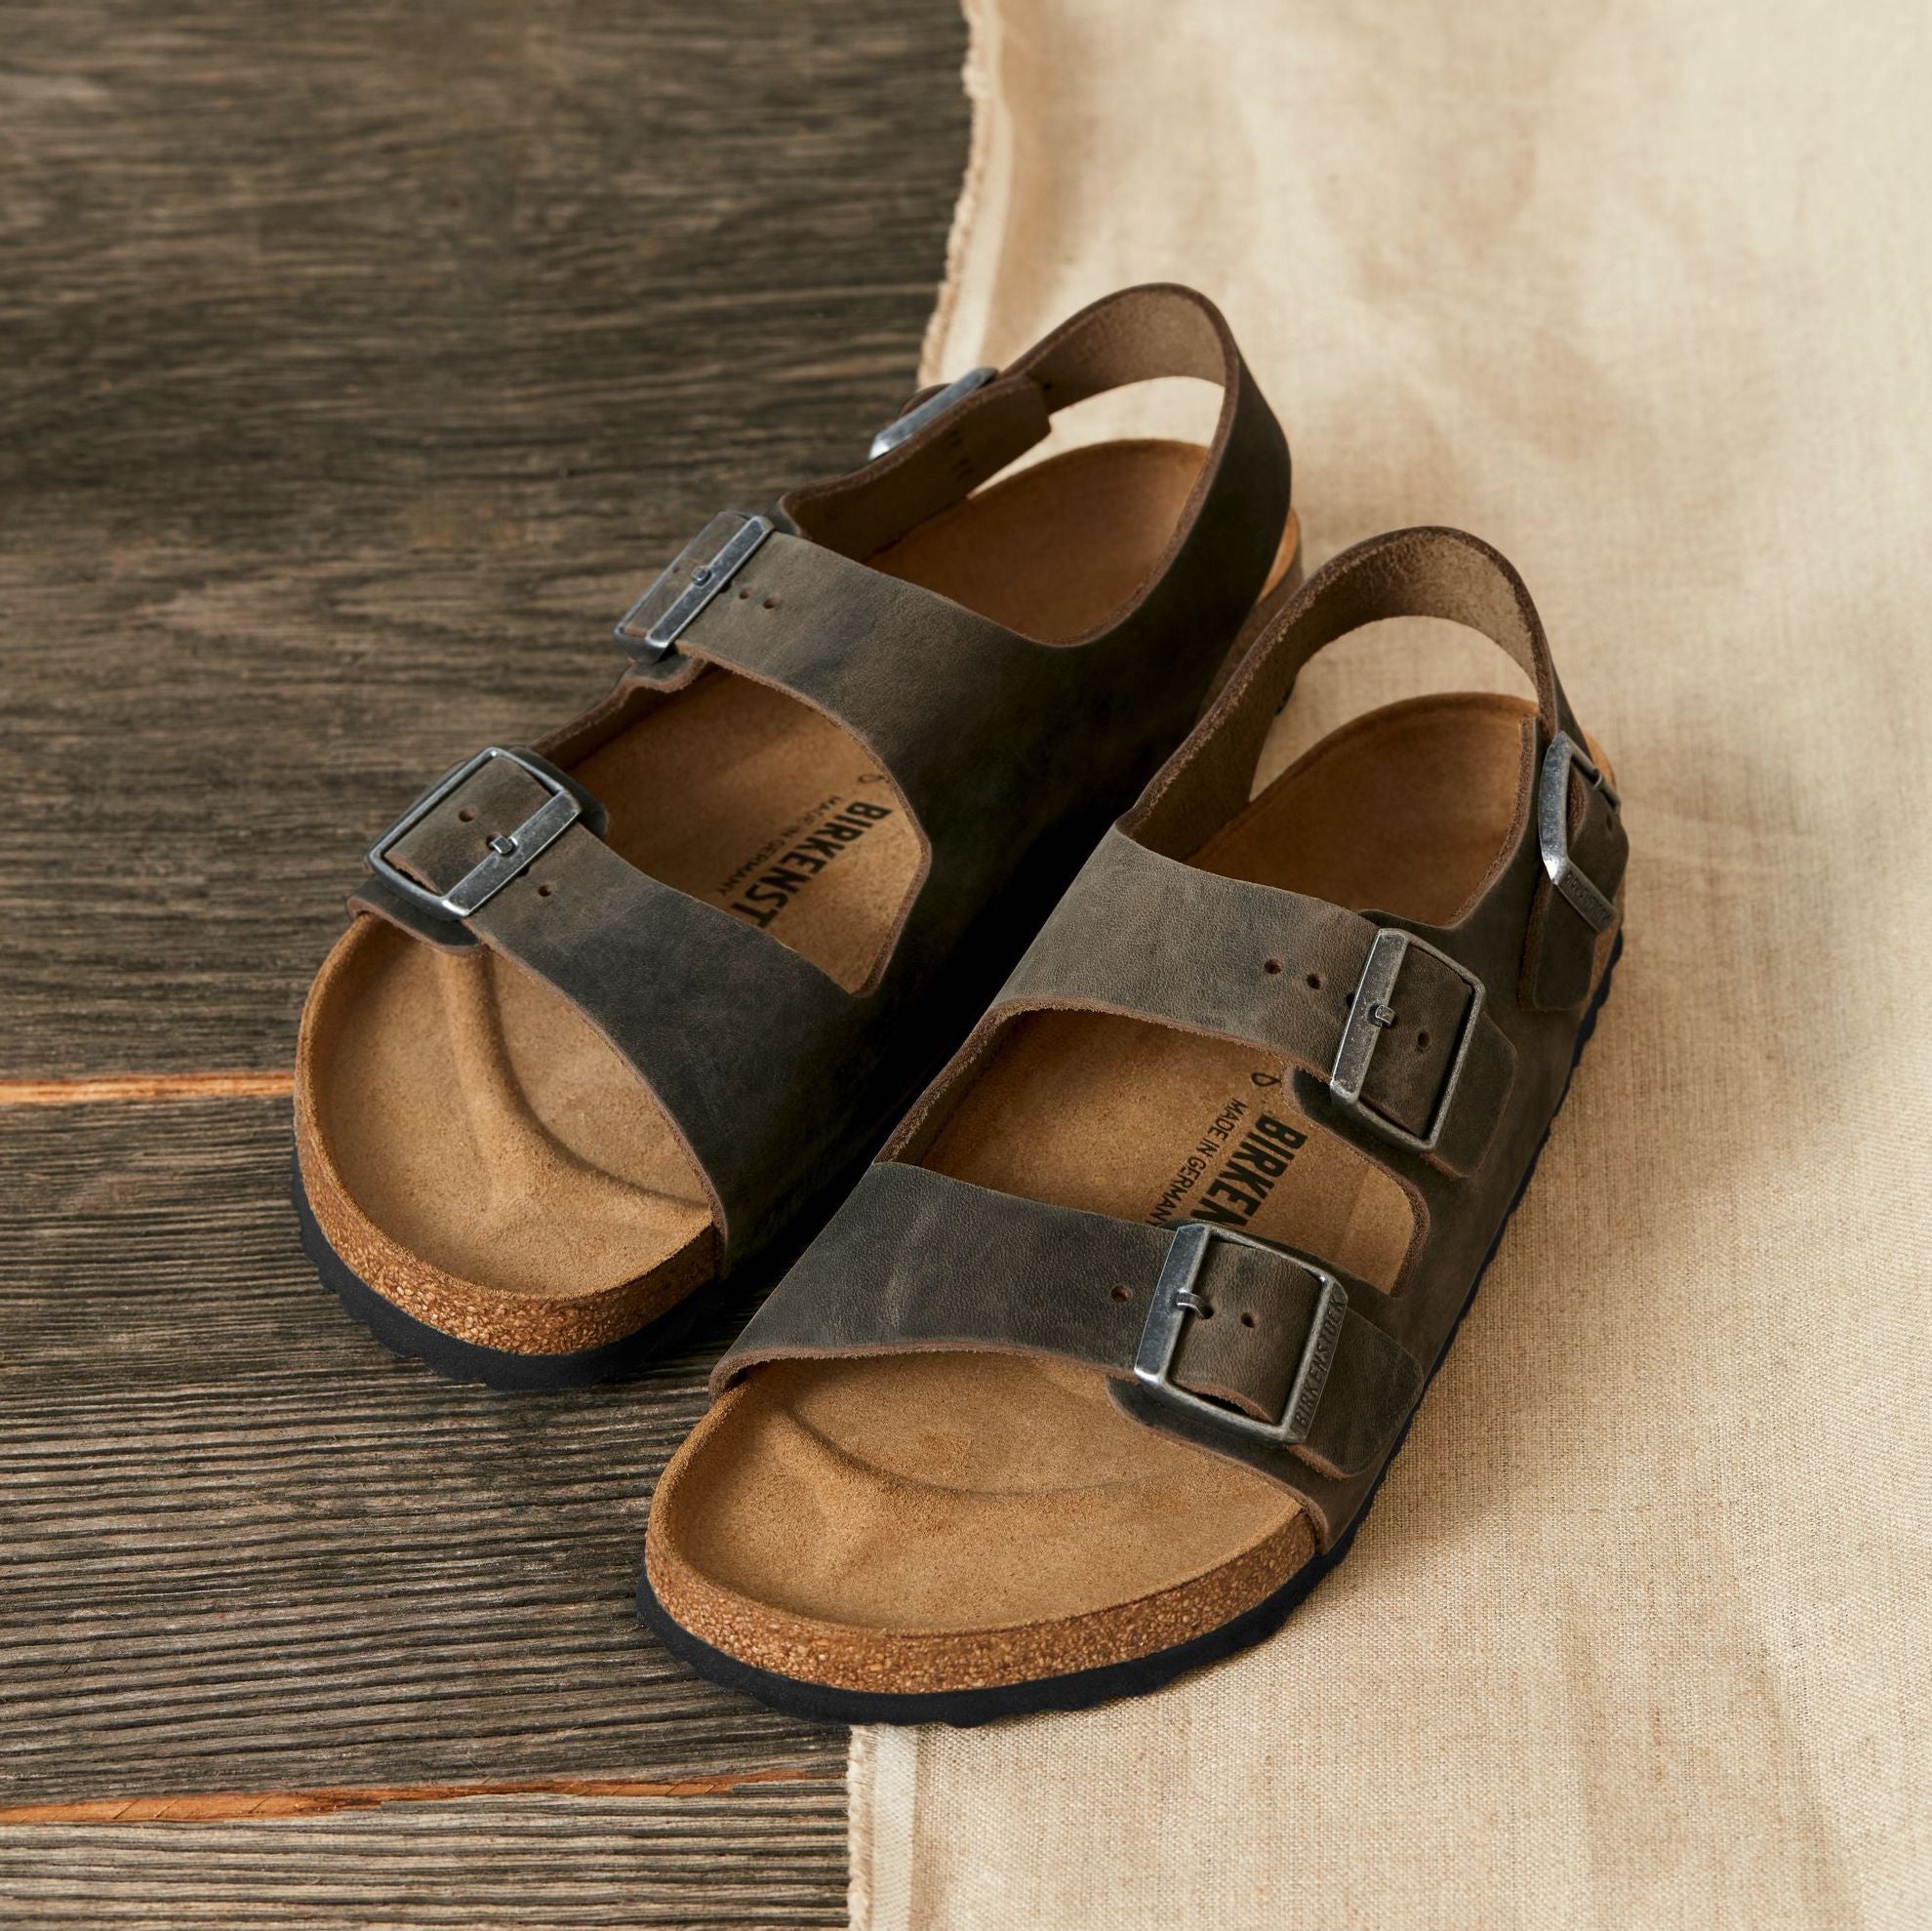 Birkenstock Limited Edition Milano faded khaki oiled leather